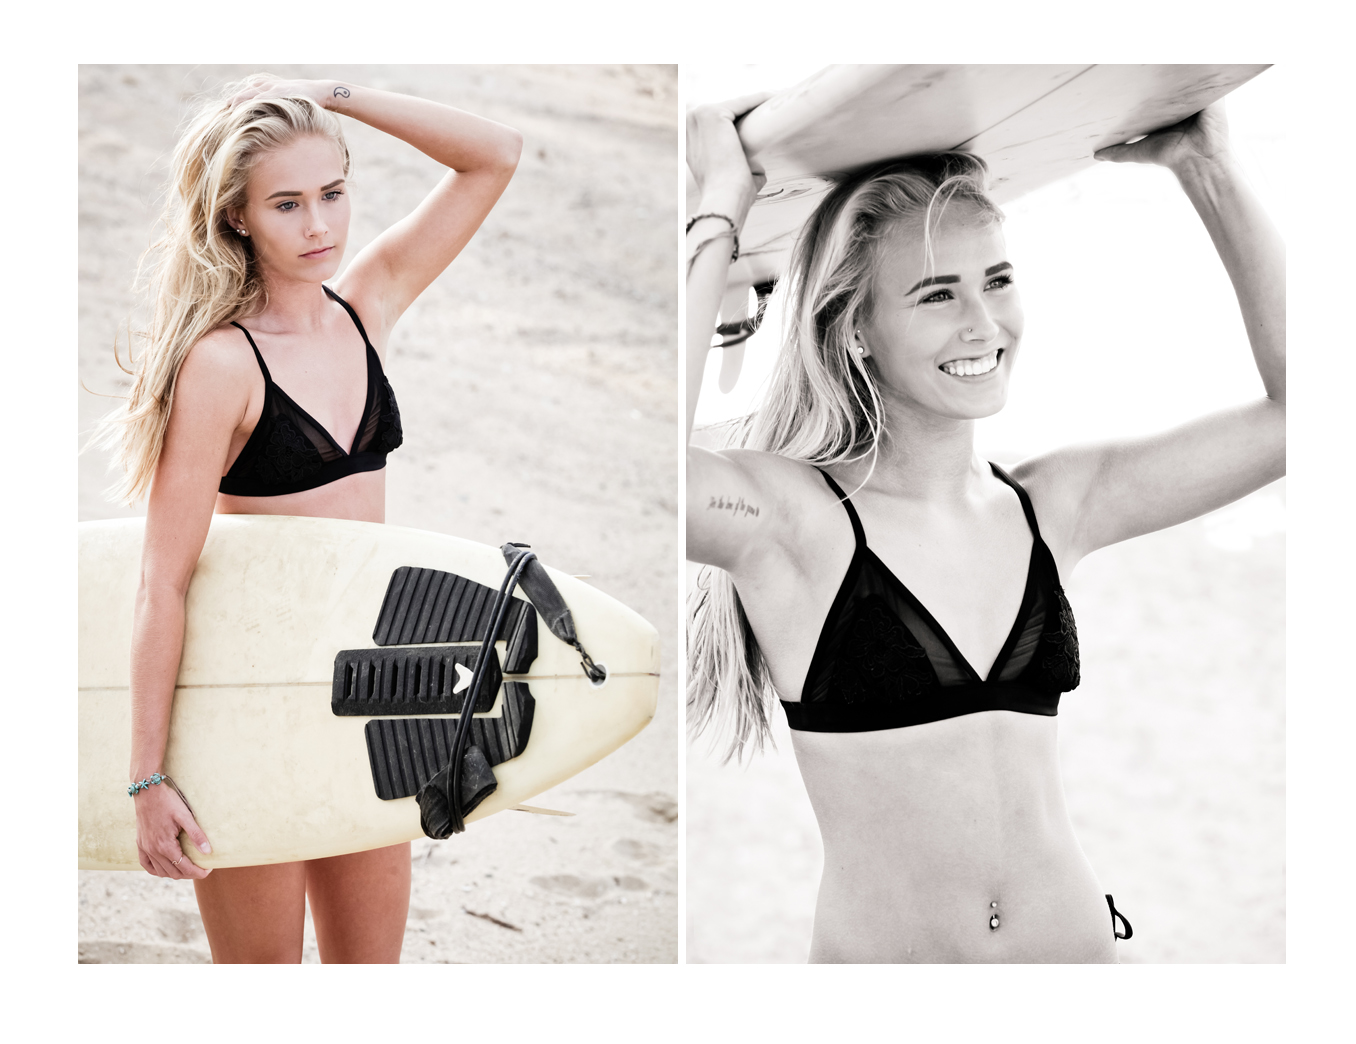 A young woman models with a surfboard. She stands facing away from the photographer, looking in the distance wearing a black swimsuit while her blonde hair tumbles over her shoulders